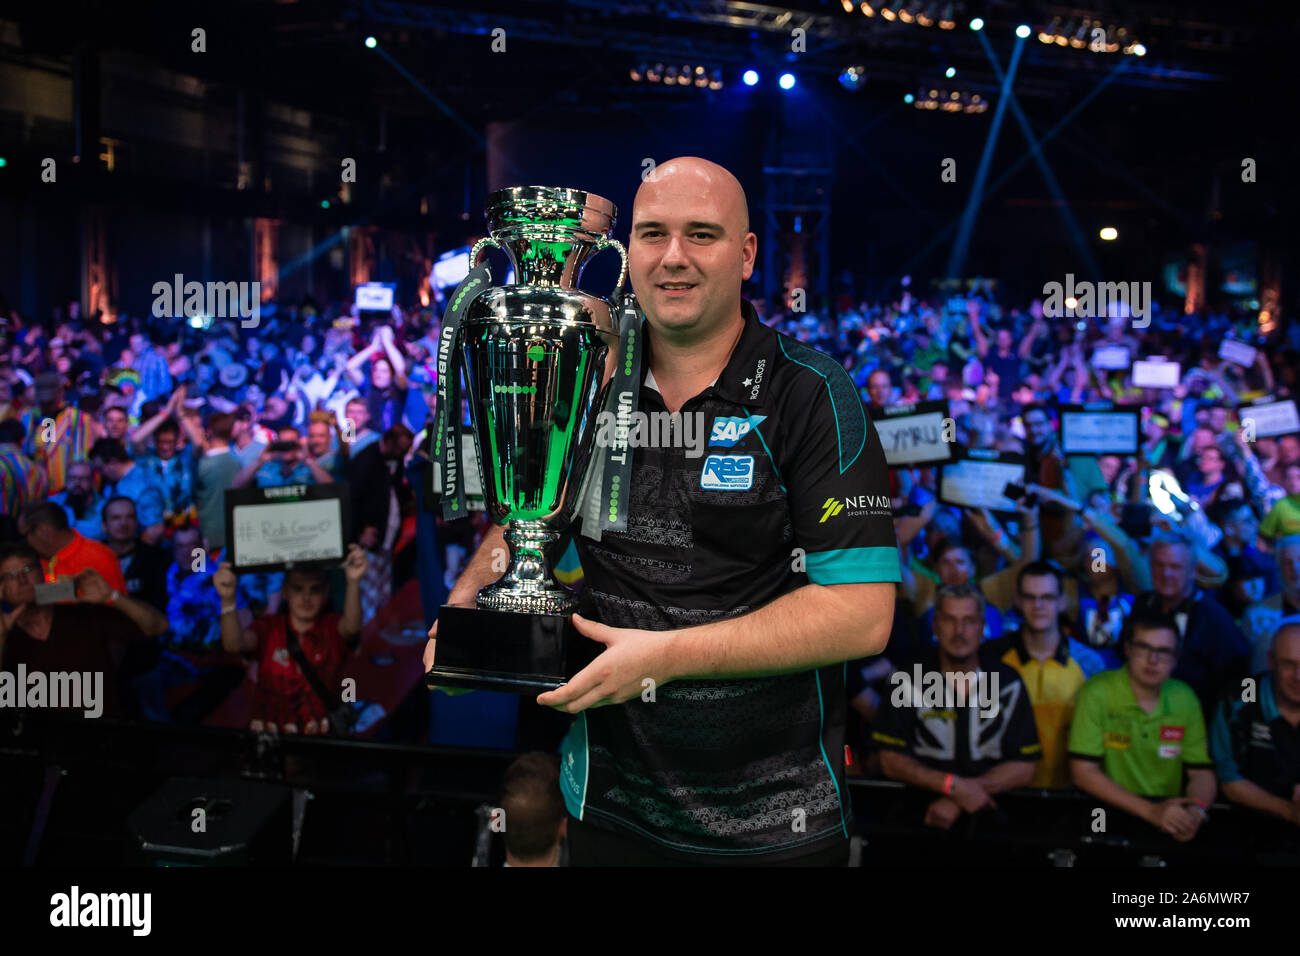 Gottingen, Germany. 27th Oct, 2019. 27 October 2019, Lower Saxony, Göttingen: Darts: PDC European Championship, final in the Lokhalle. Rob Cross from England holds the victory trophy after winning the final against Price. Credit: dpa picture alliance/Alamy Live News Stock Photo